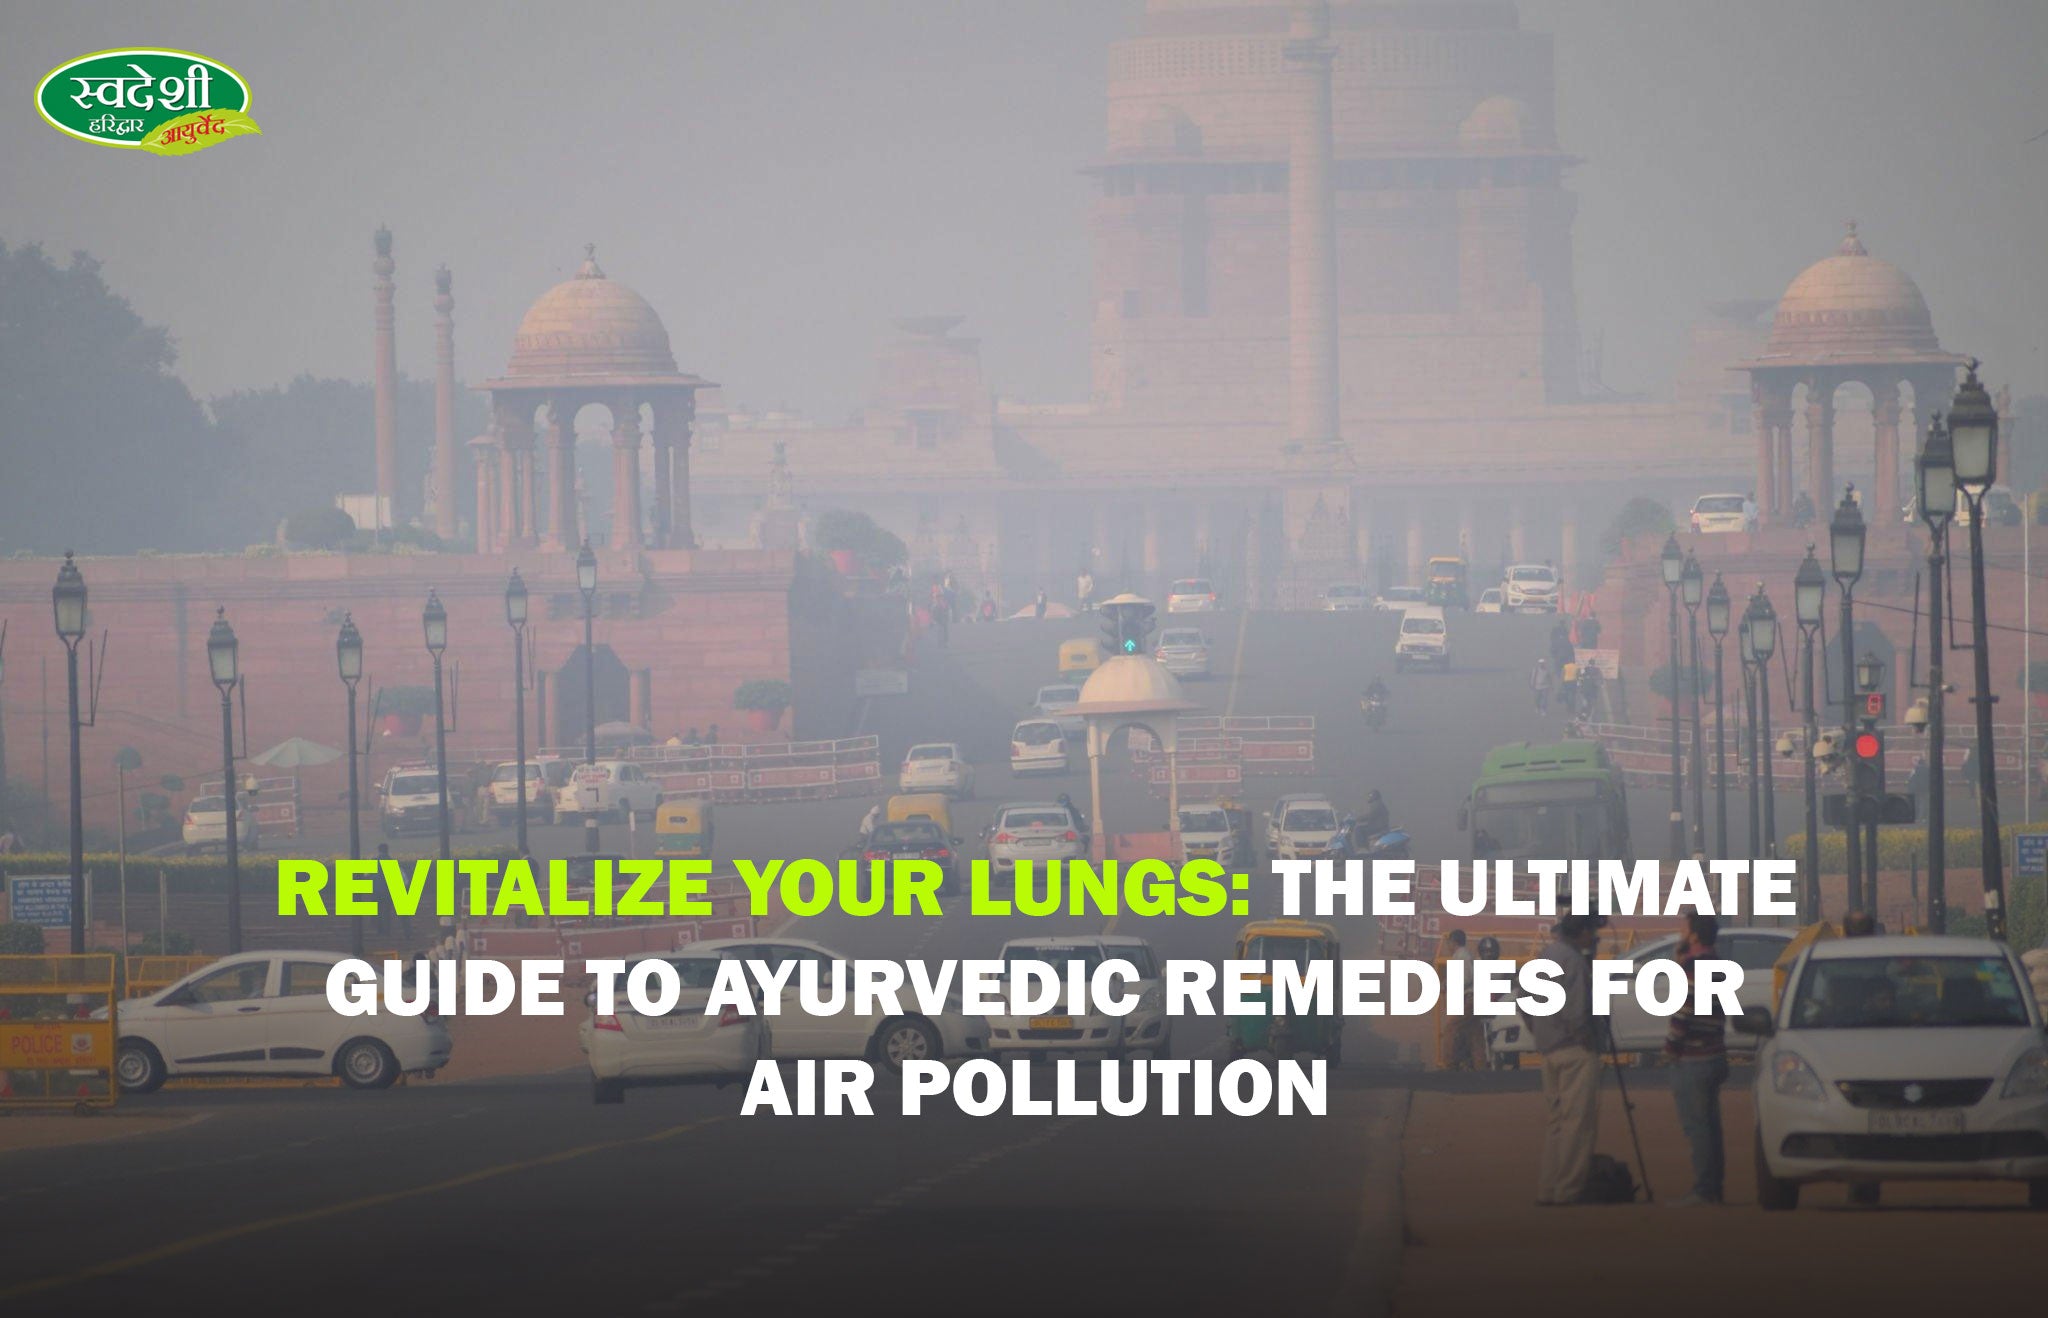 Revitalize Your Lungs: The Ultimate Guide to Ayurvedic Remedies for Air Pollution